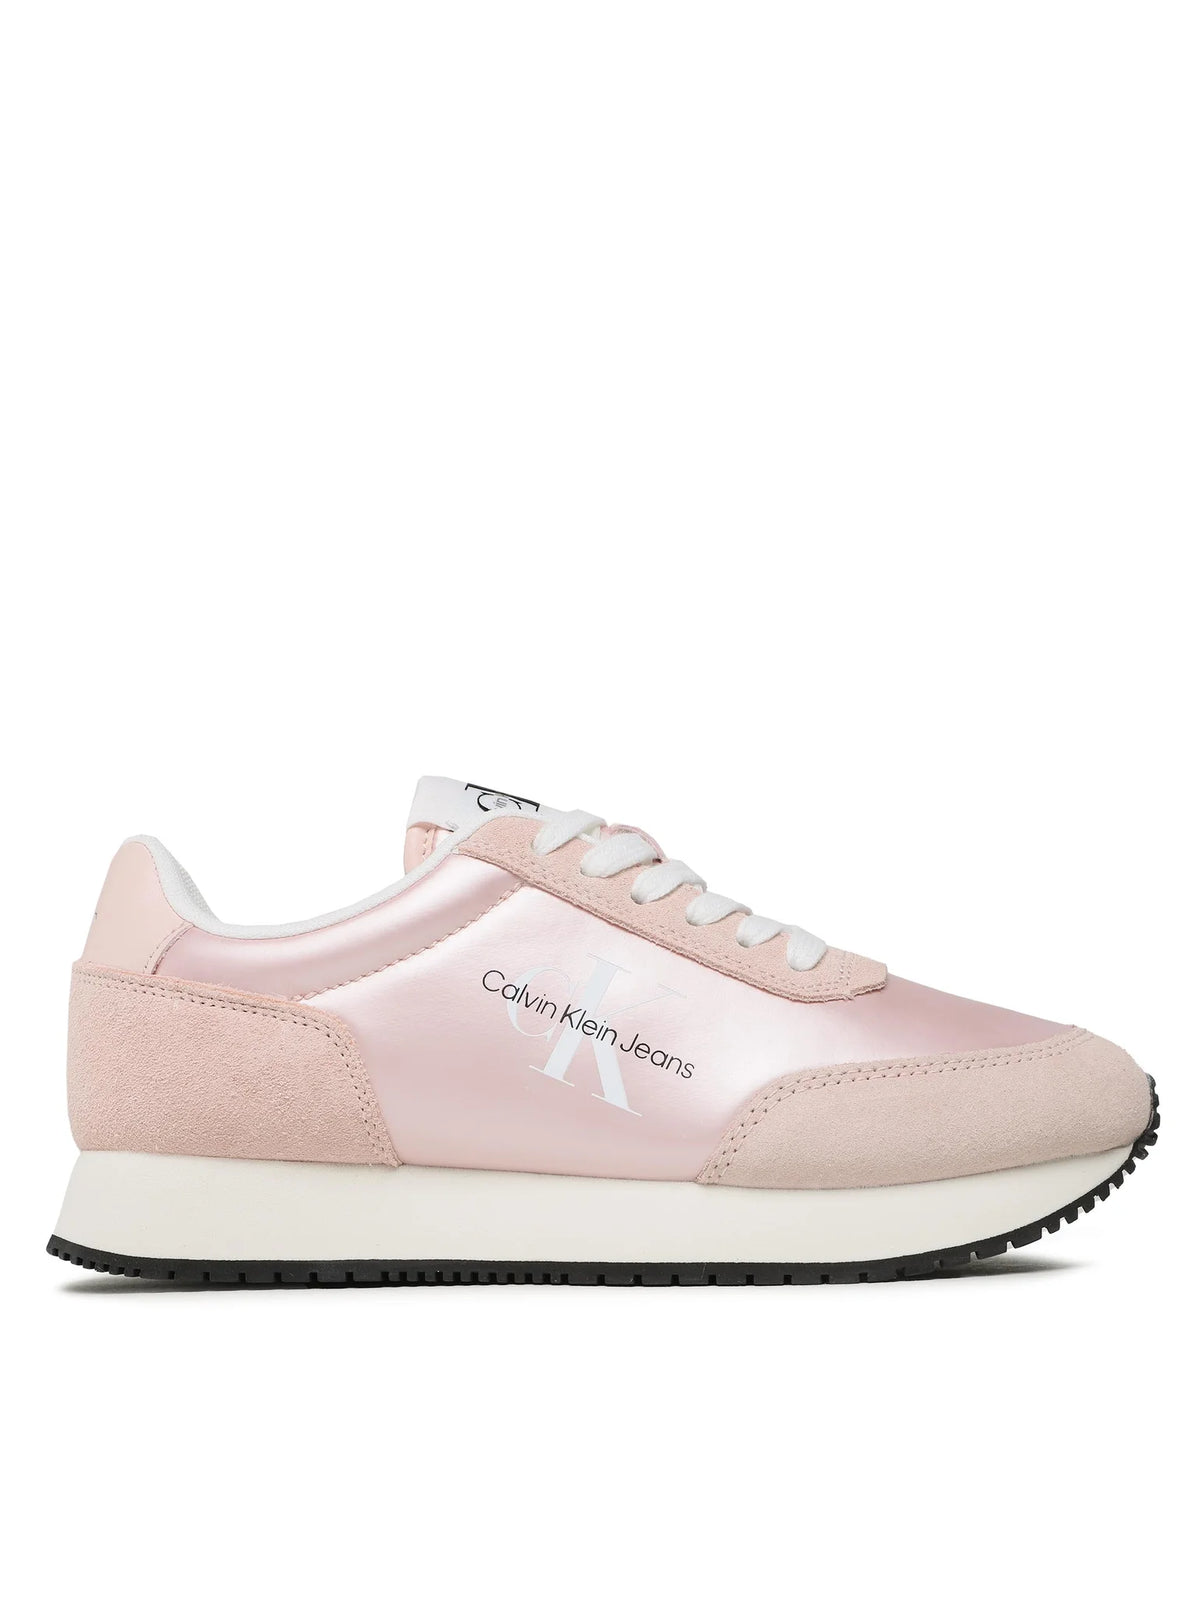 Calvin Klein Yw010560 Womens Retro Low Laceup Ny Pink